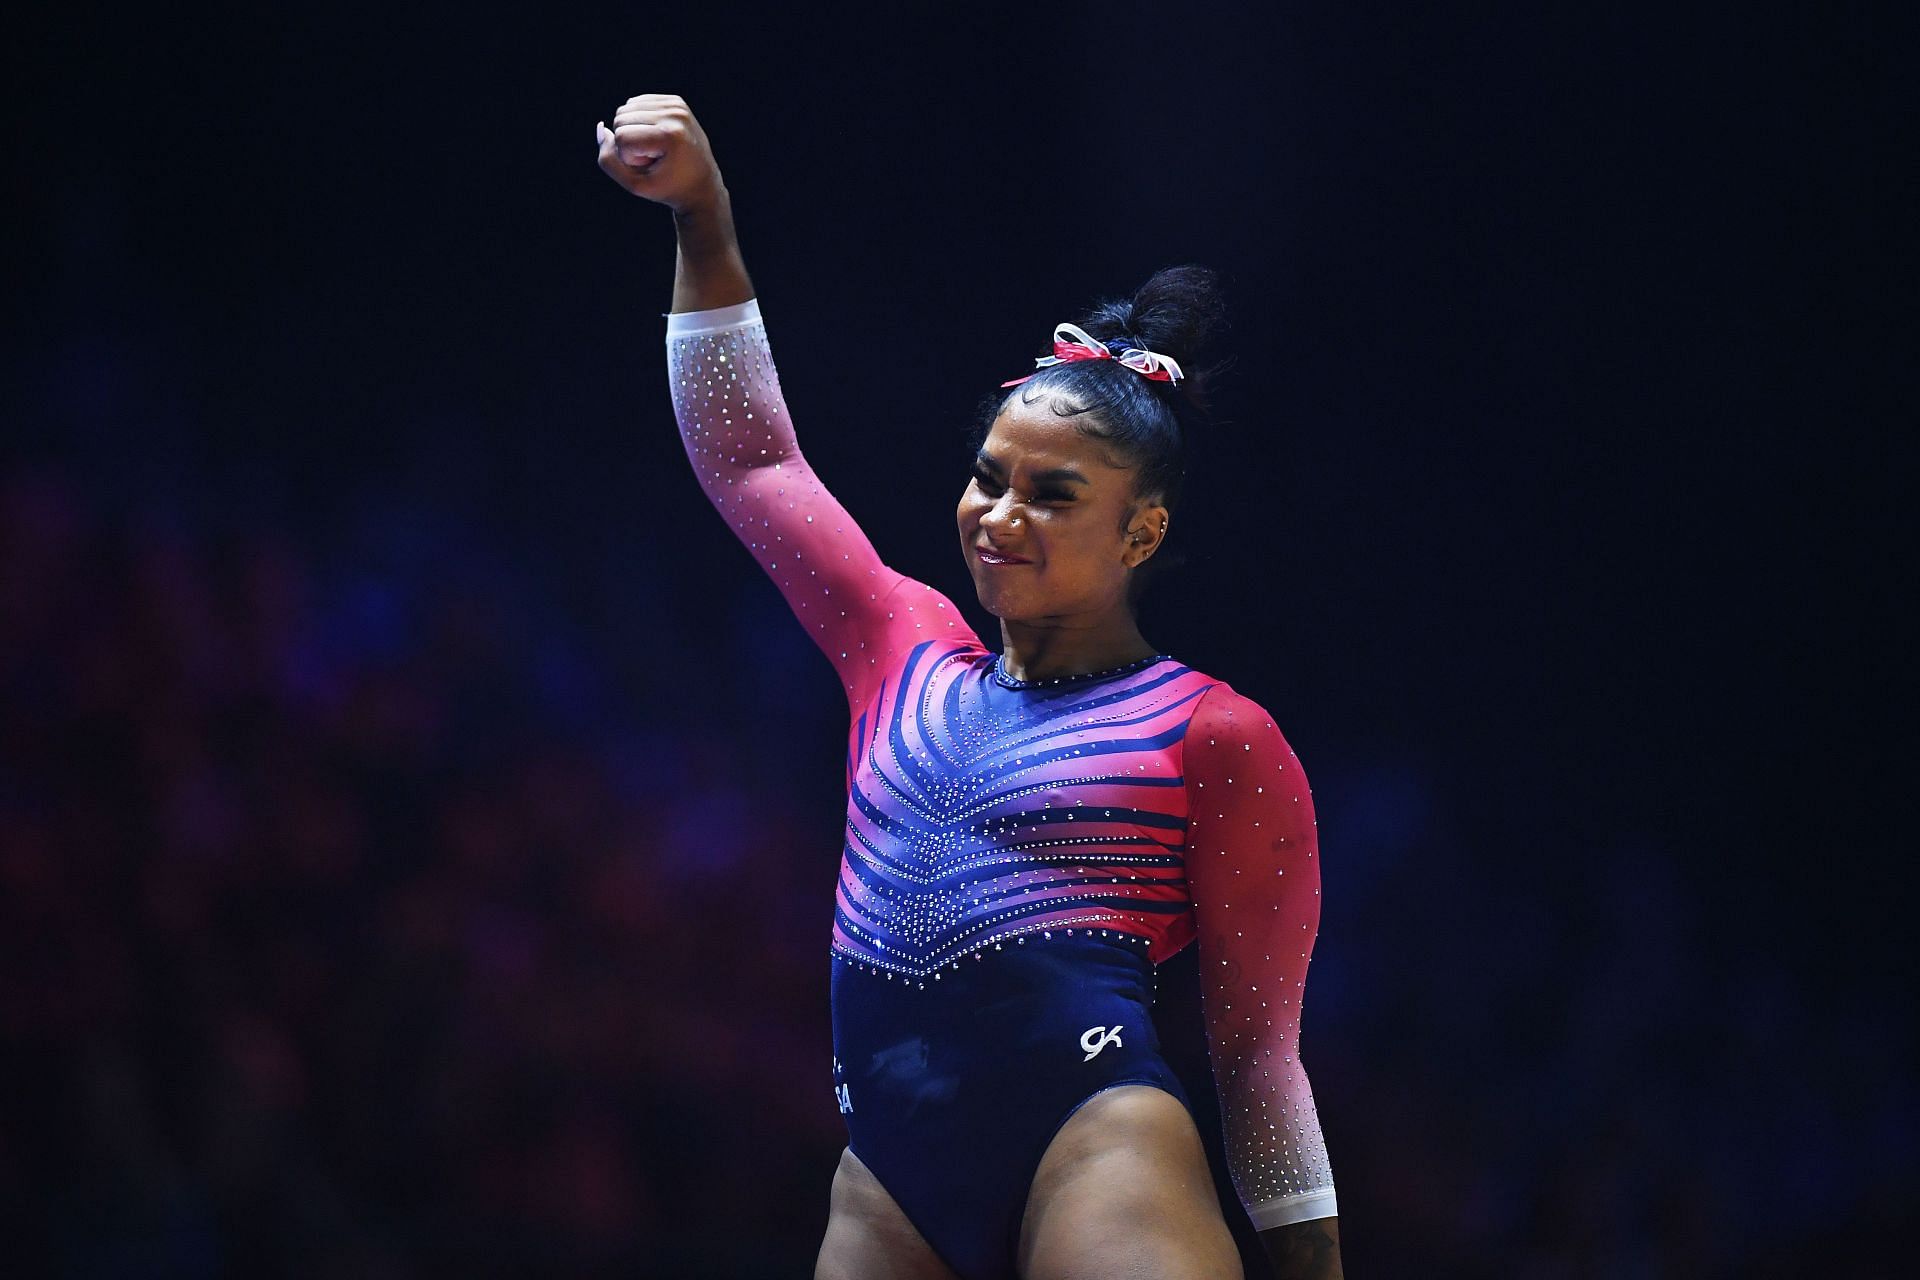 Jordan Chiles celebrates after completing her routine at the 2022 Gymnastics World Championships, in Liverpool, England